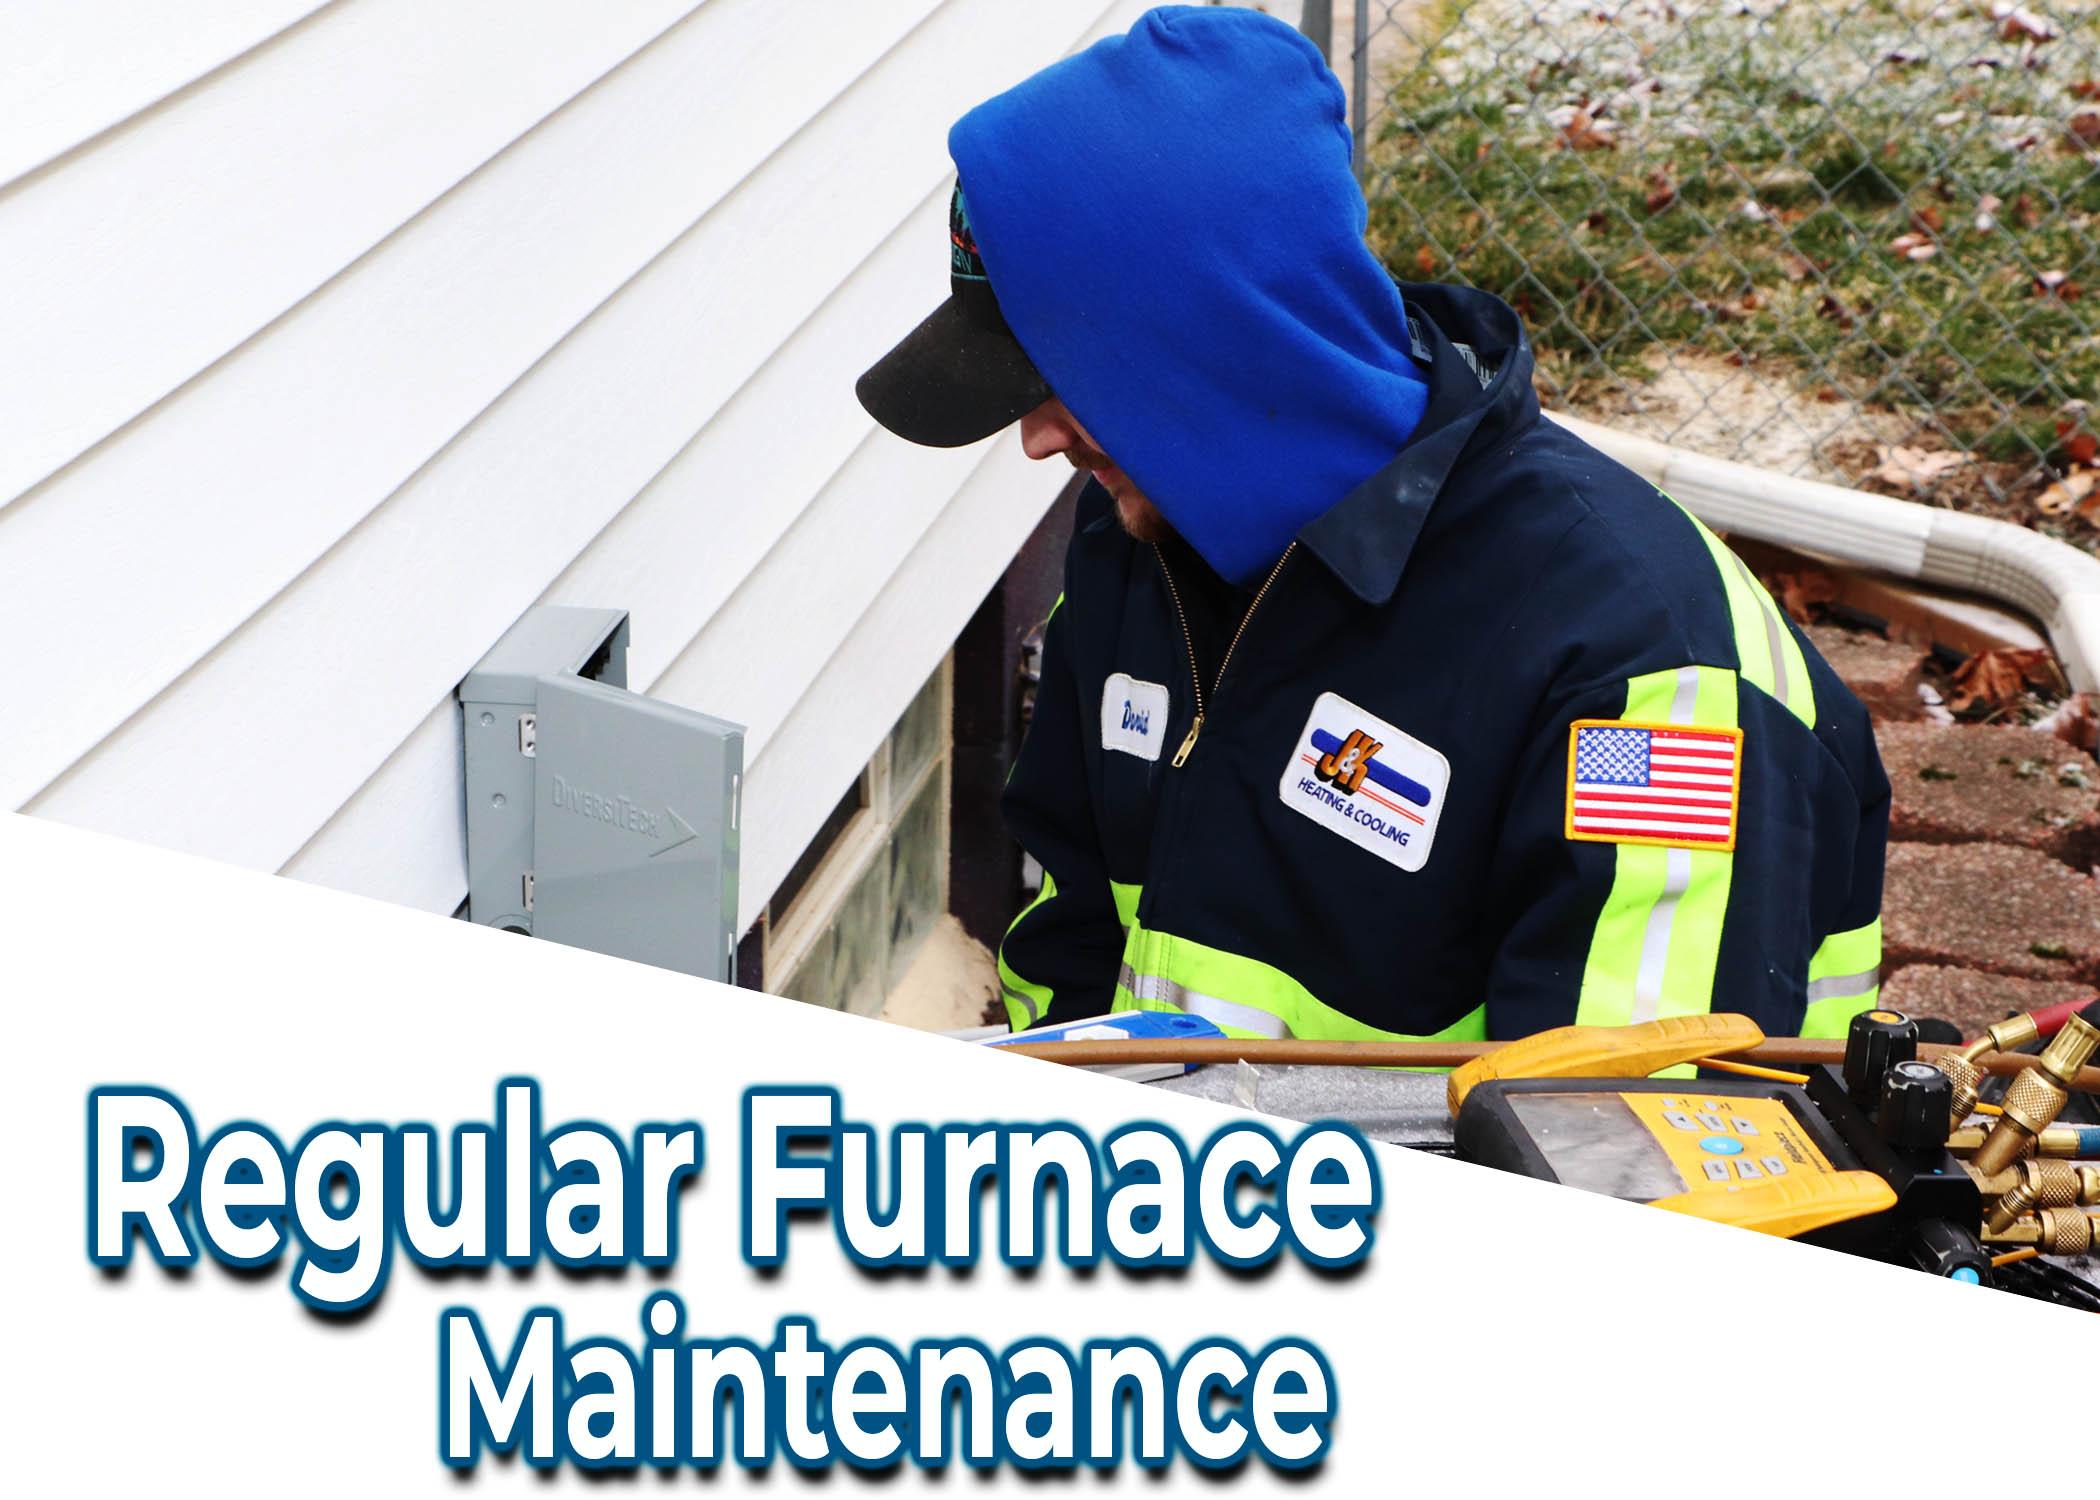 Furnace Dust Problems and How to Get Rid of Them